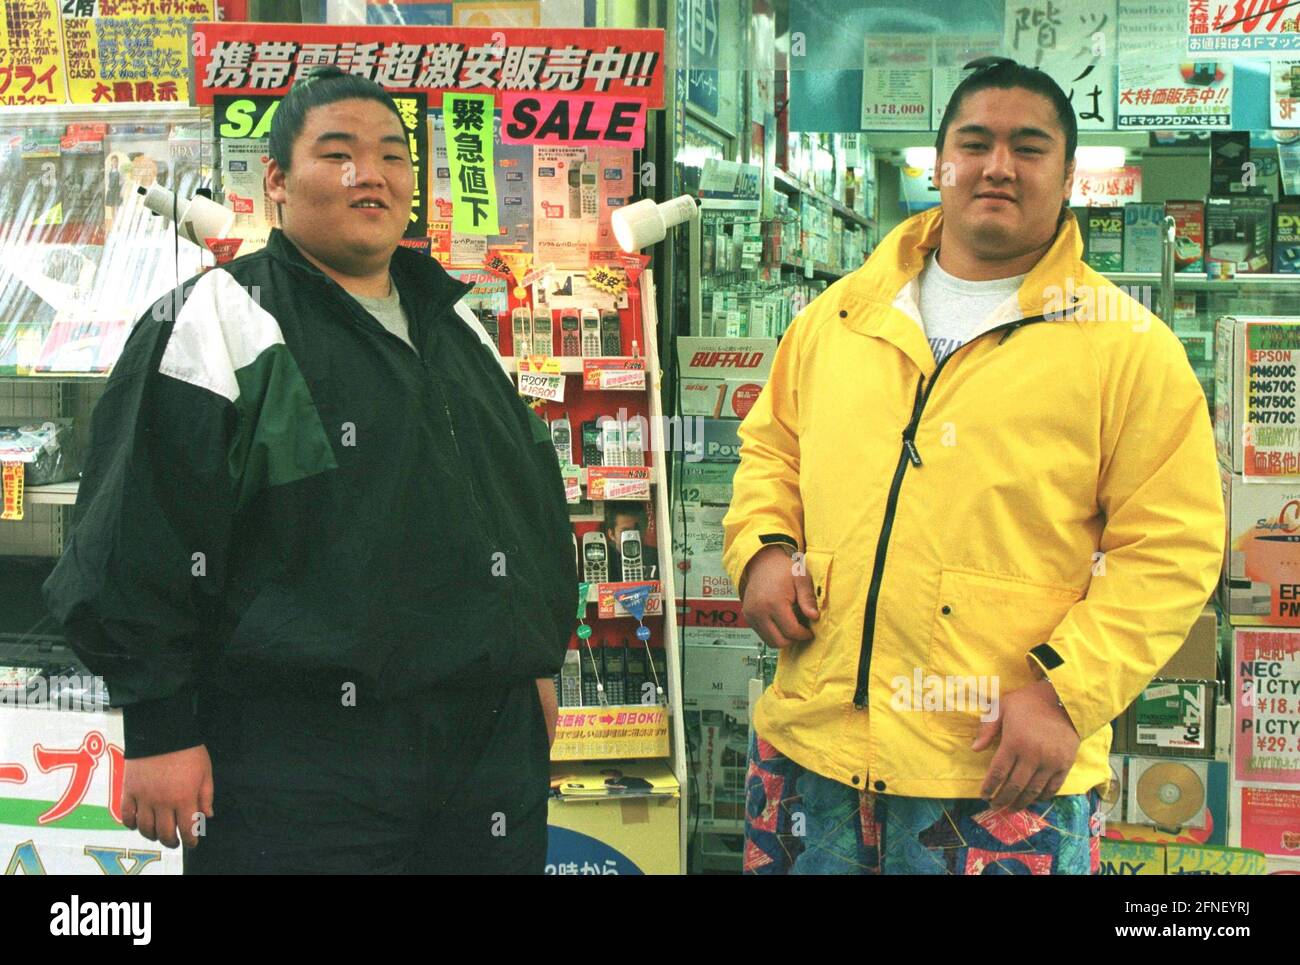 Tokyo's Akihabara district ('Eletric City') is the mecca of electronics in the Japanese capital. Two sumo wrestlers in front of a shelf with mobile phones on special offer. [automated translation] Stock Photo